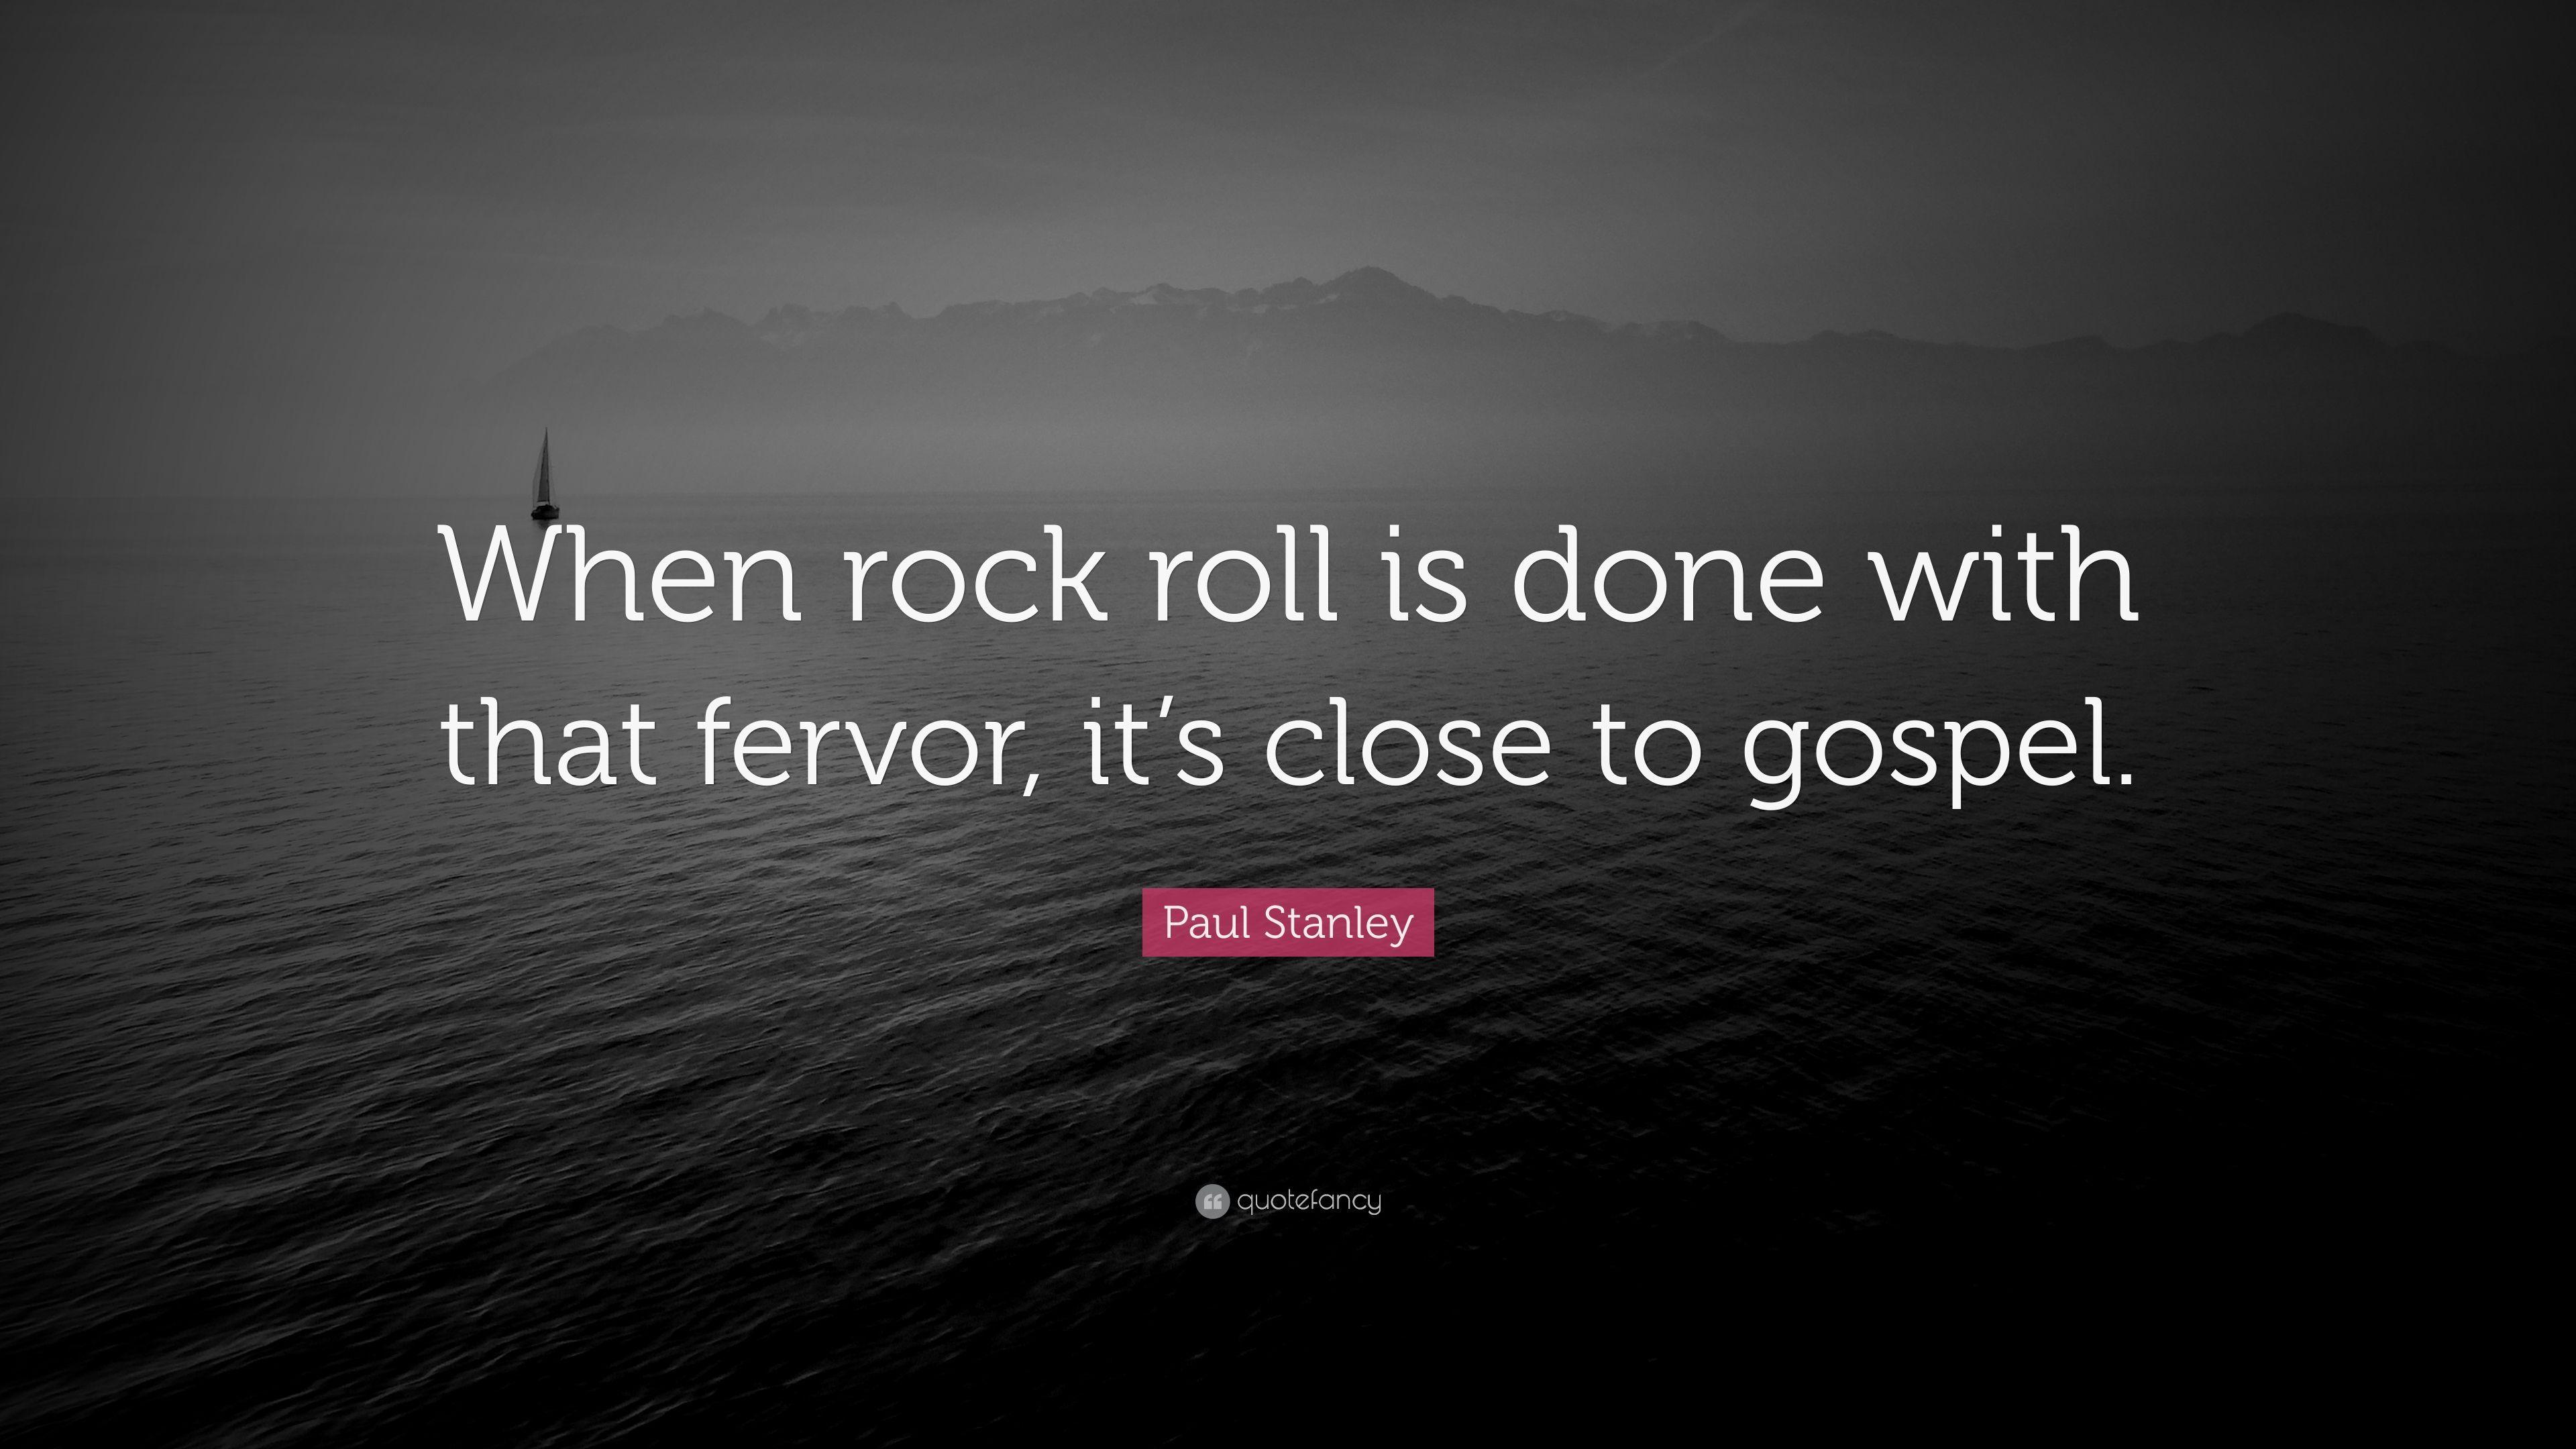 Paul Stanley Quote: “When rock roll is done with that fervor, it's